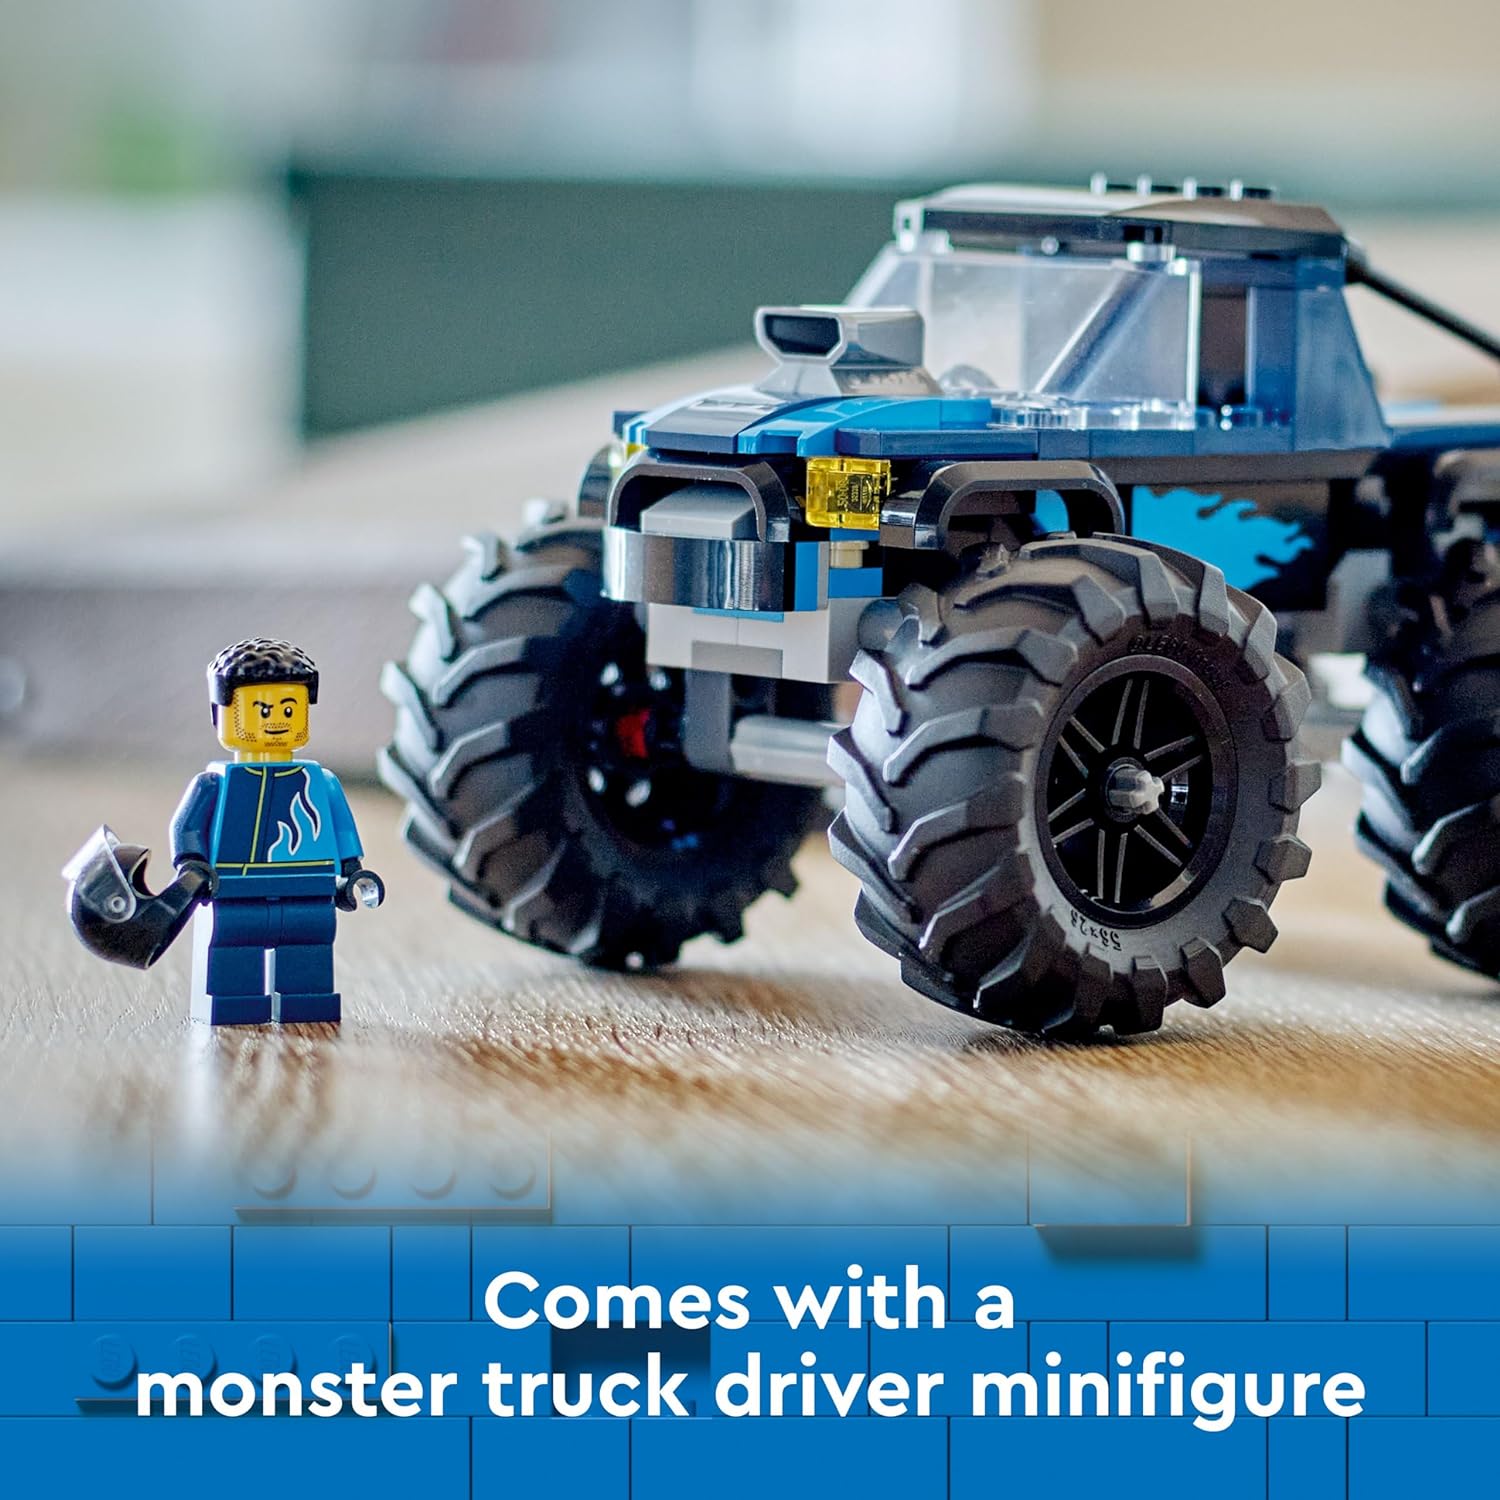 LEGO City Blue Monster Truck Off-Road Toy Set Building Kit for Ages 5+